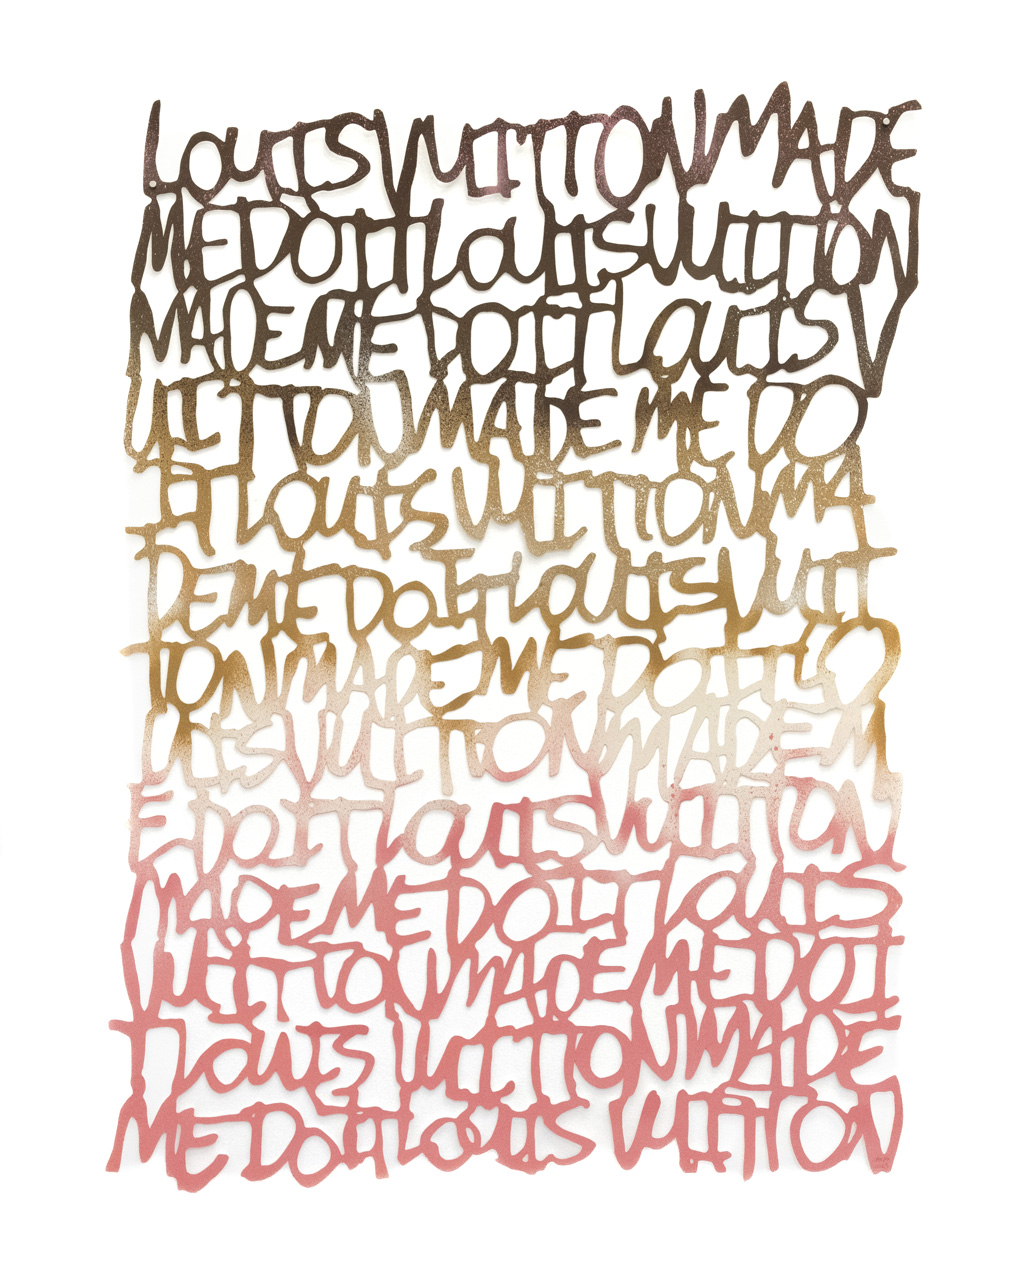 an art piece of words on paper by Chris West